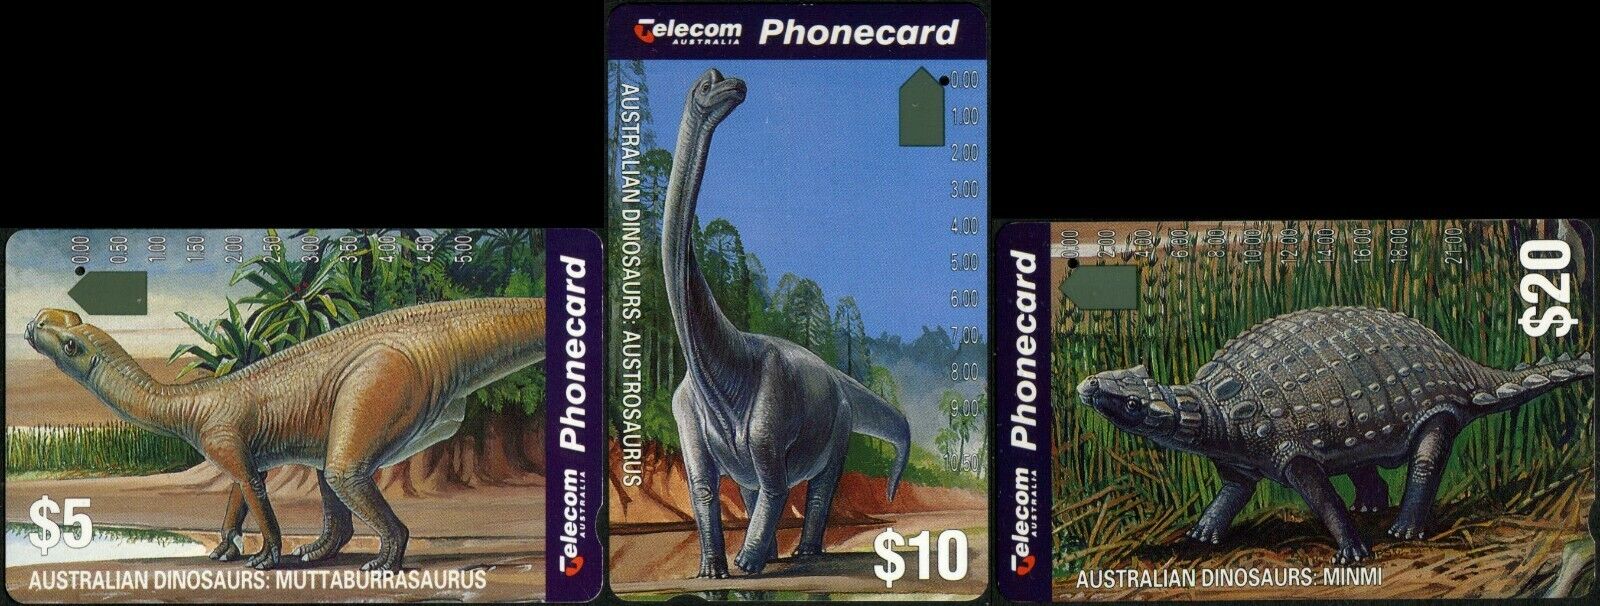 1994 Australia Dinosaurs Set Of 3 Phone Cards One Hole Used, Very Good Condition